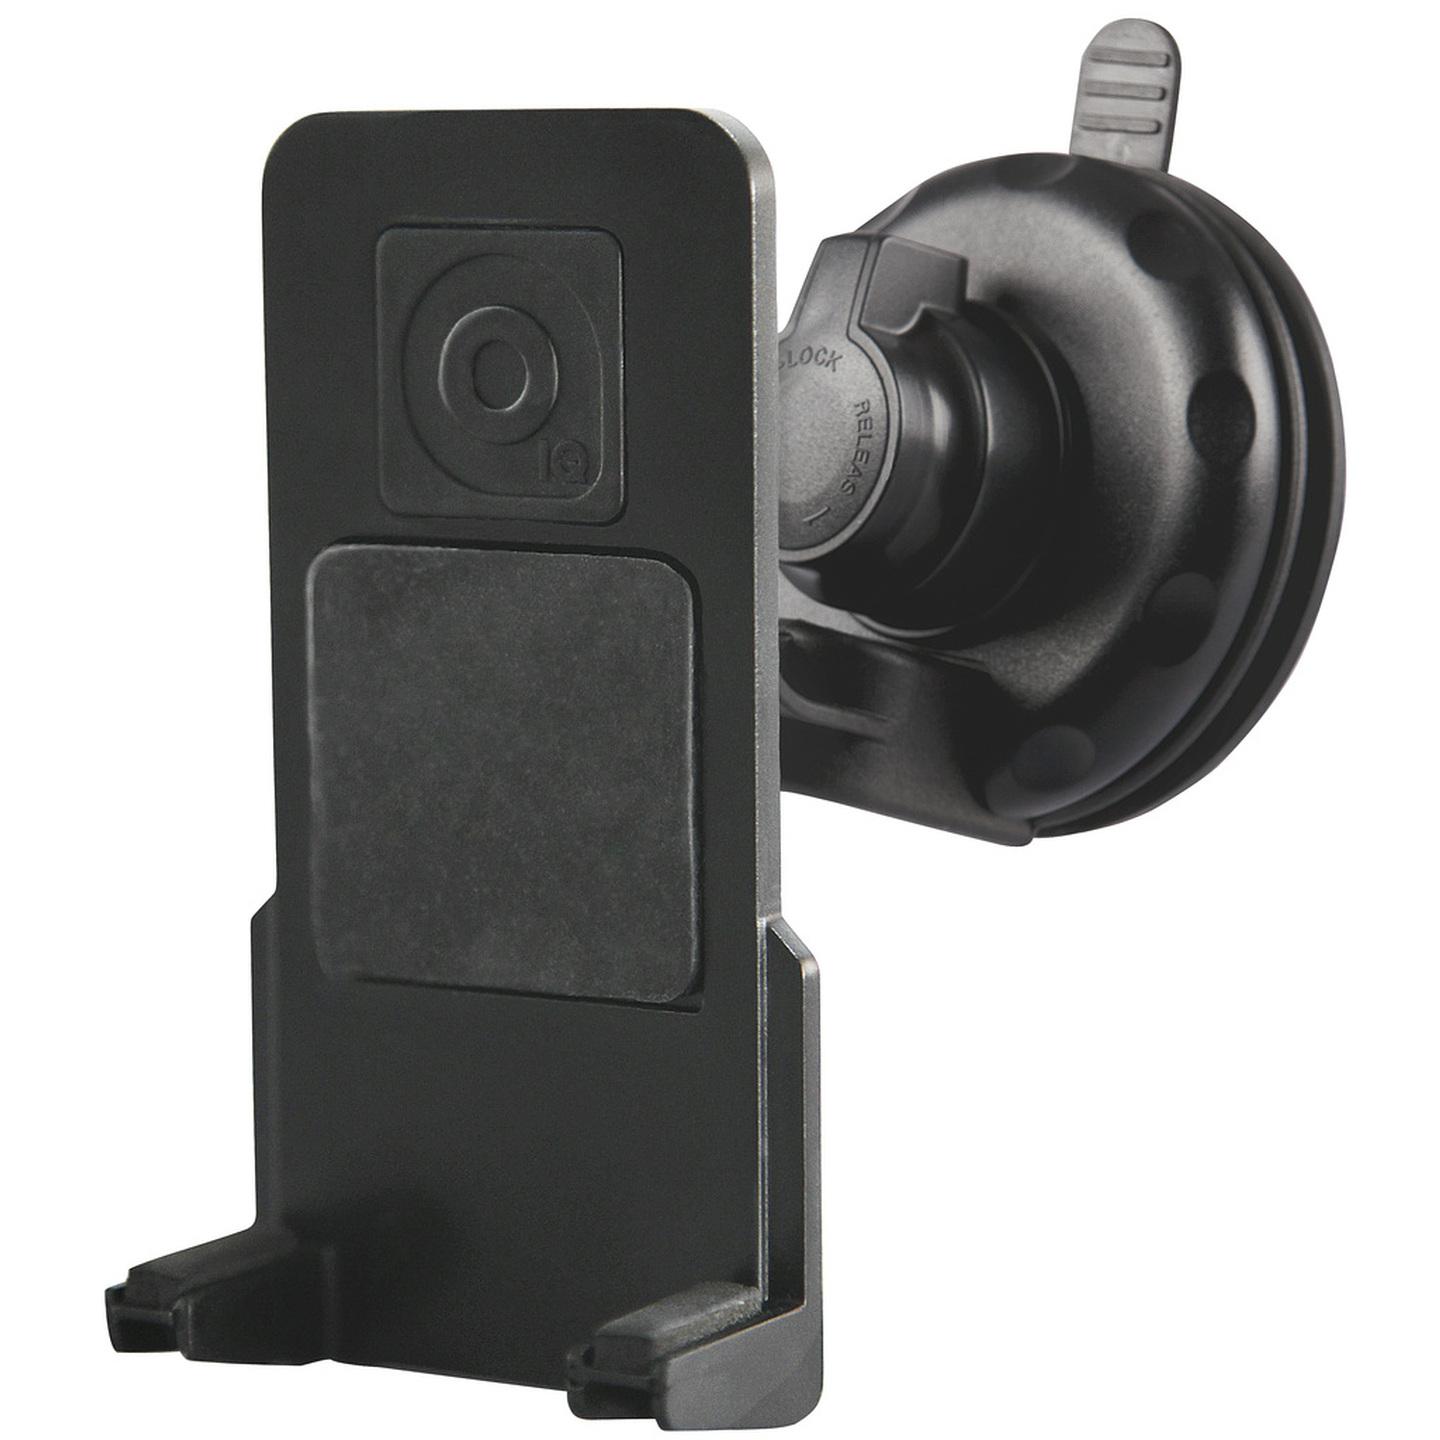 Universal Suction Mount Bracket for Mobiles & iPhone 3G/3GS/4/4S